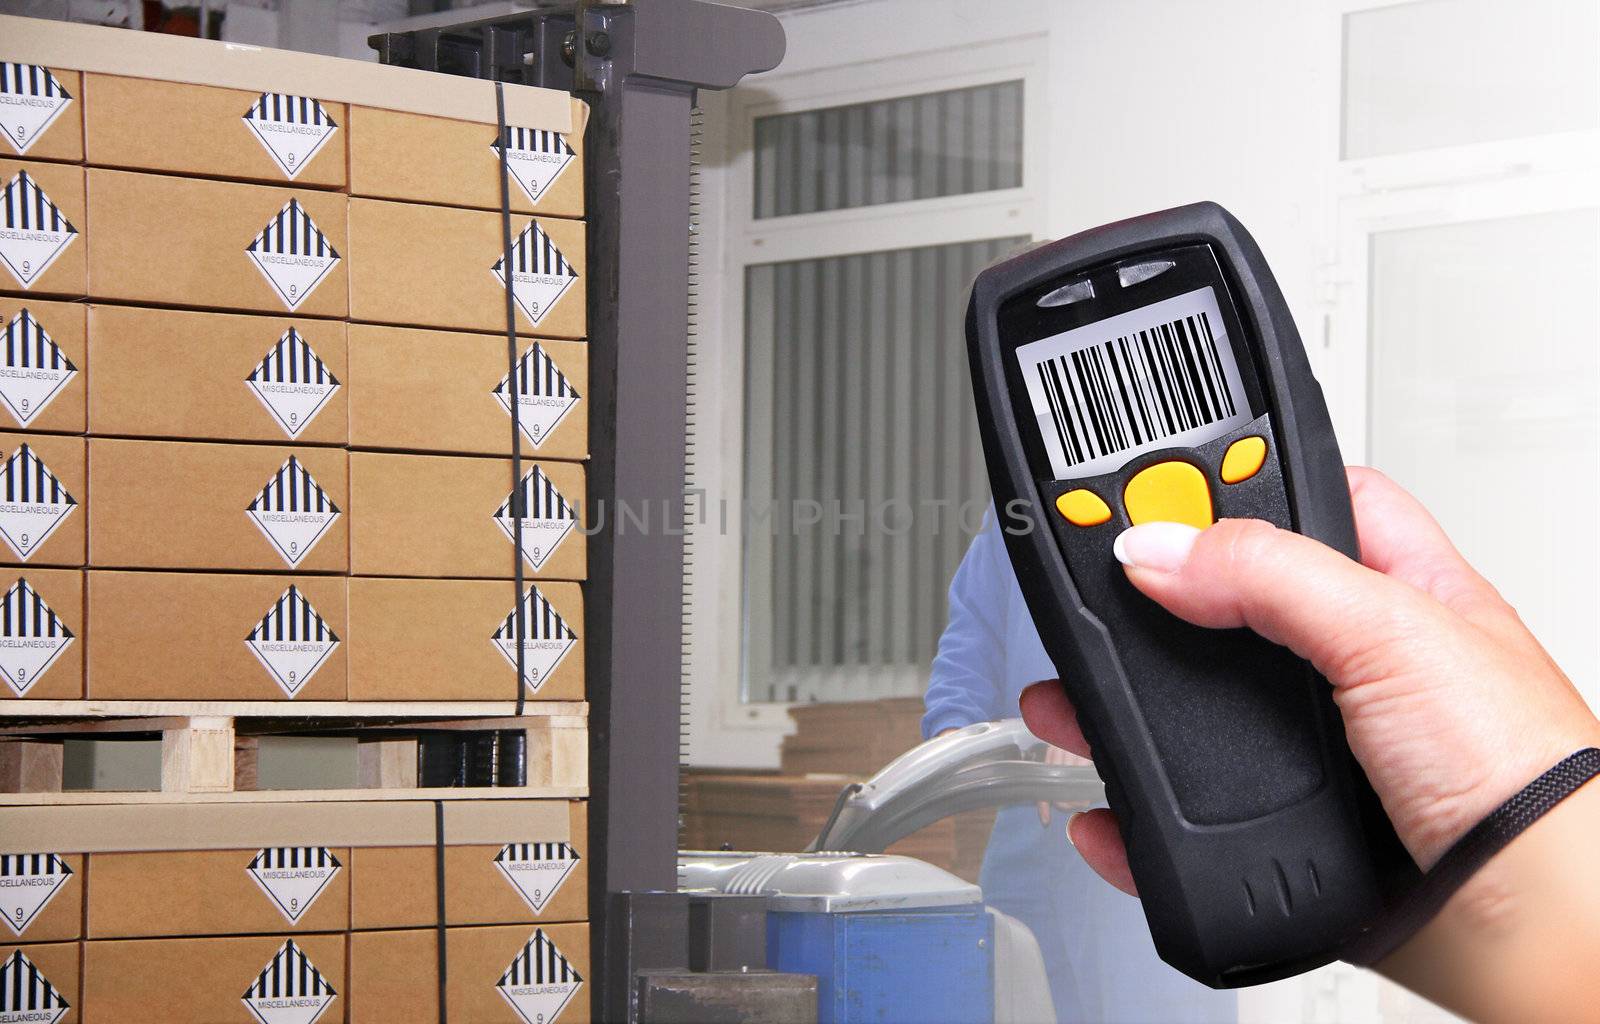 Barcode Scanner by Hasenonkel